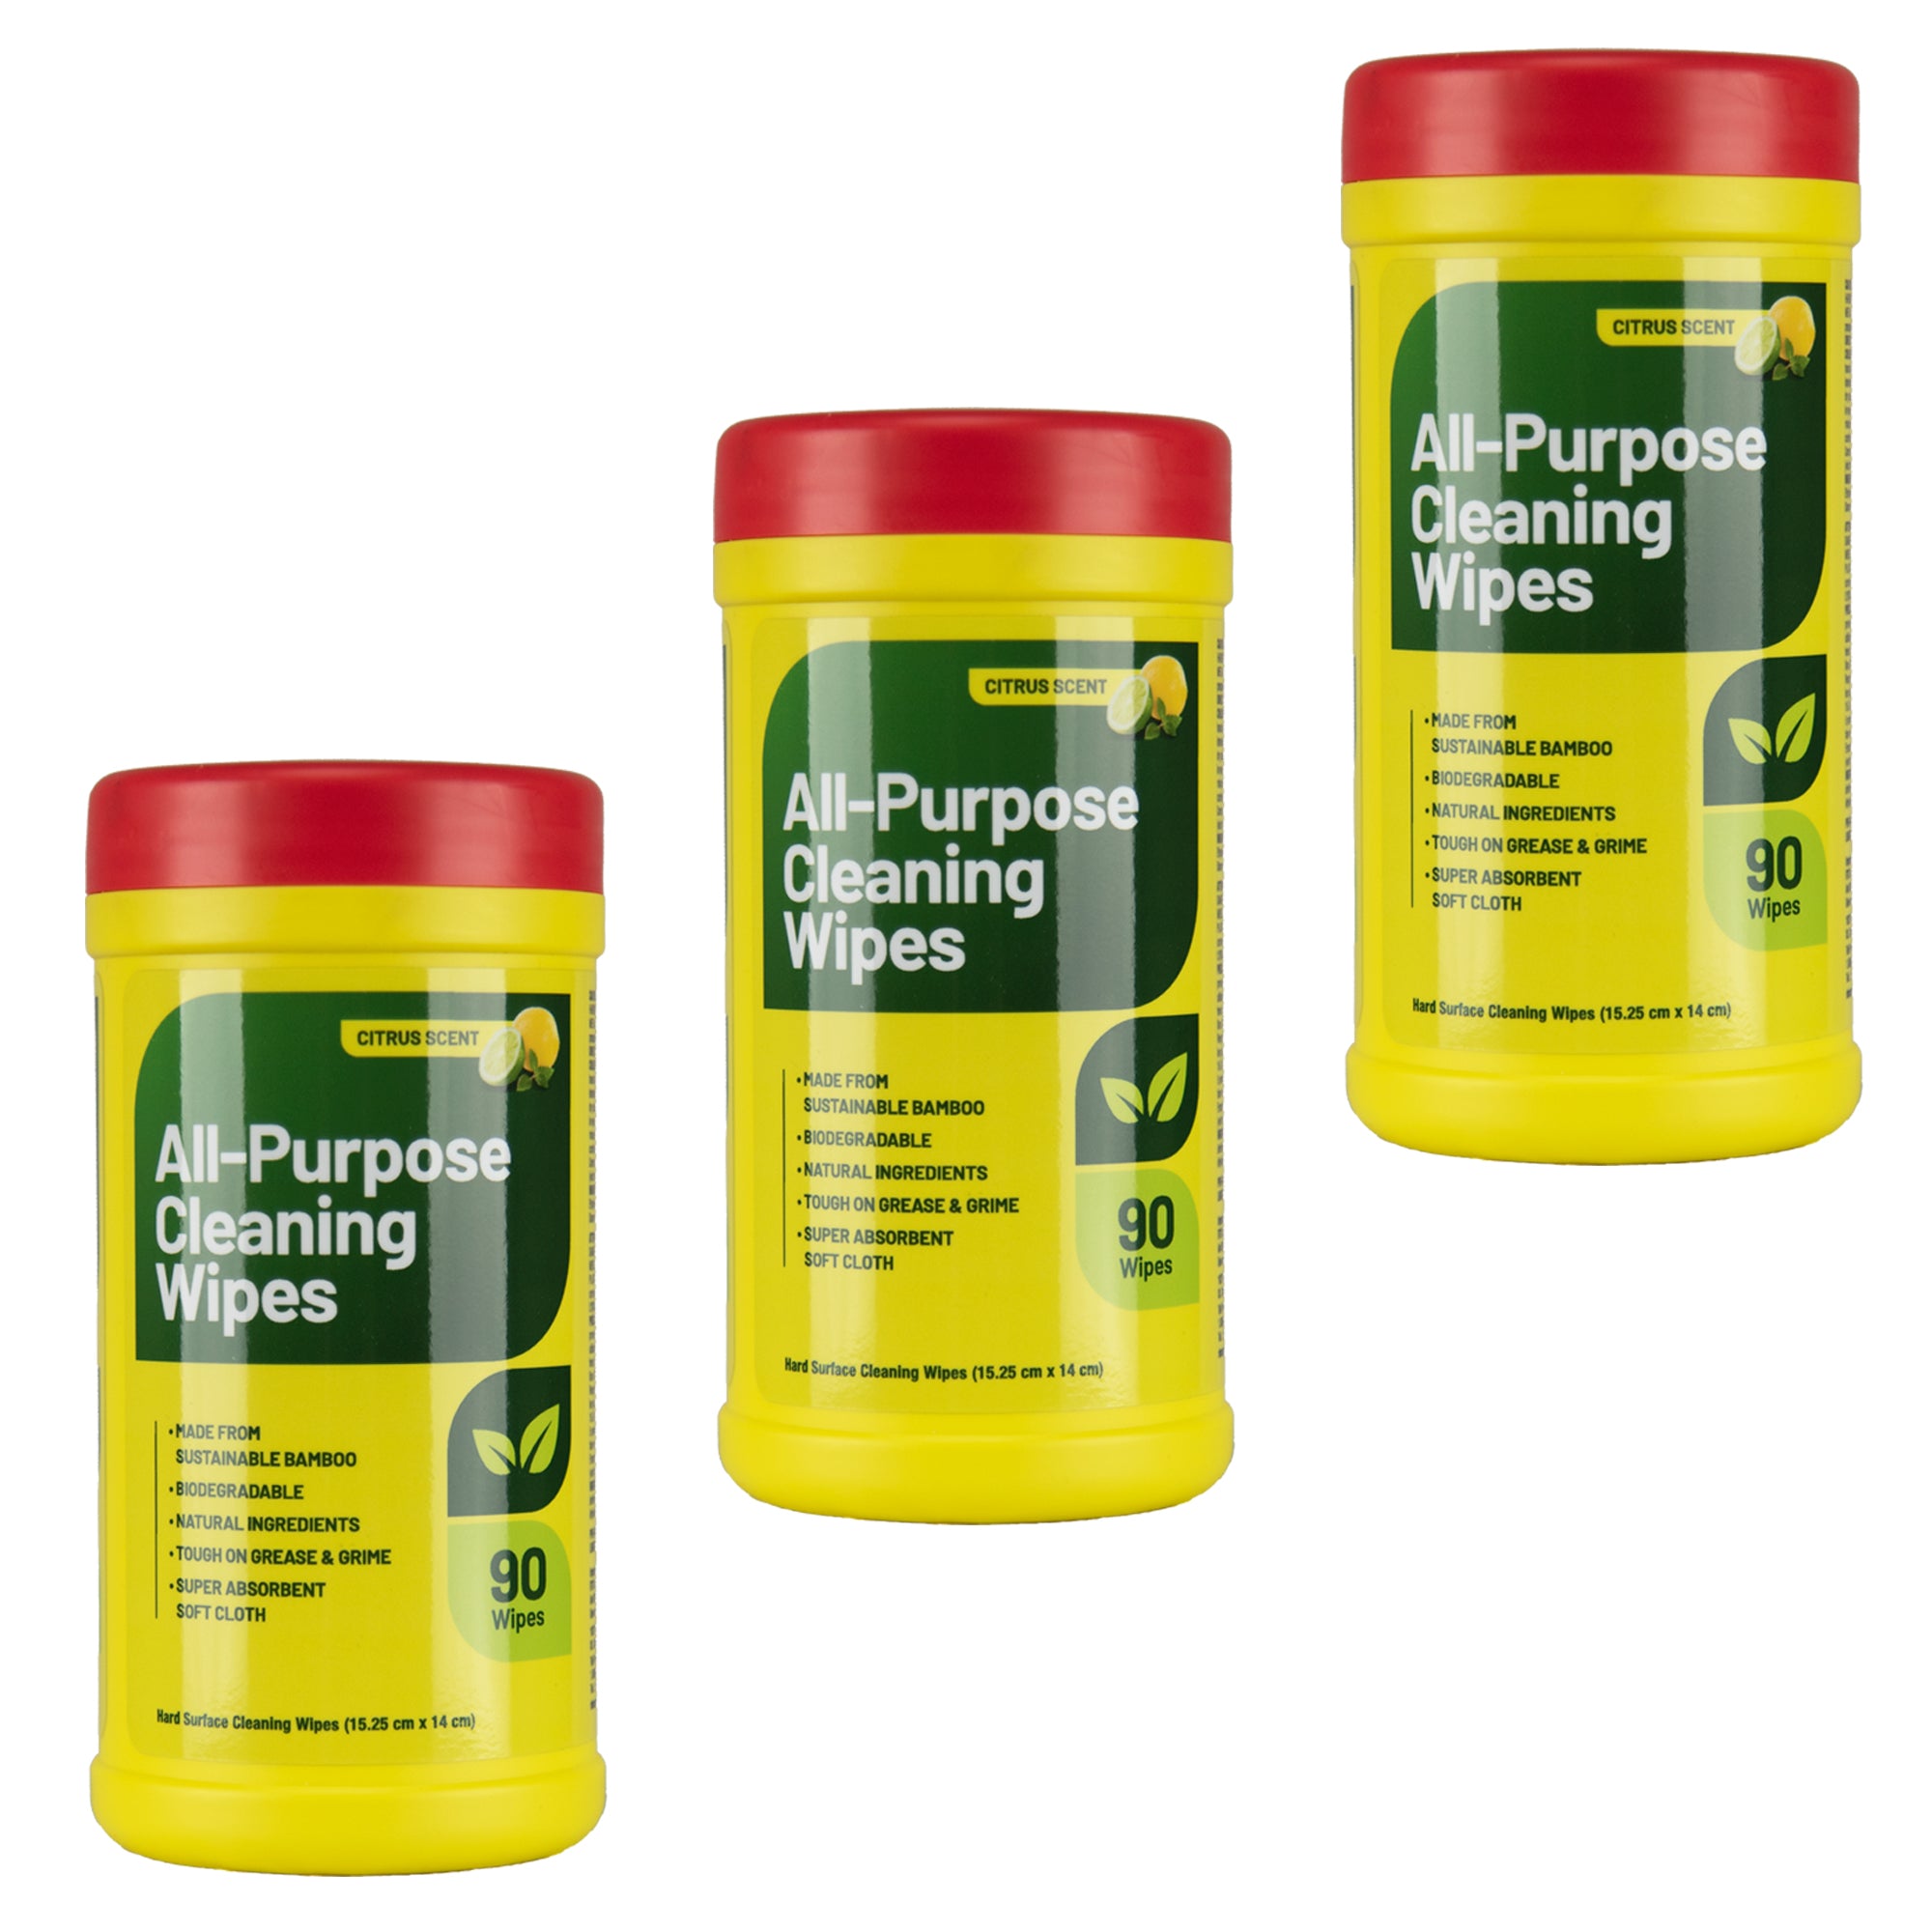 3 canister of All-Purpose Cleaning Wipes, 90 wipes per canister on a white background